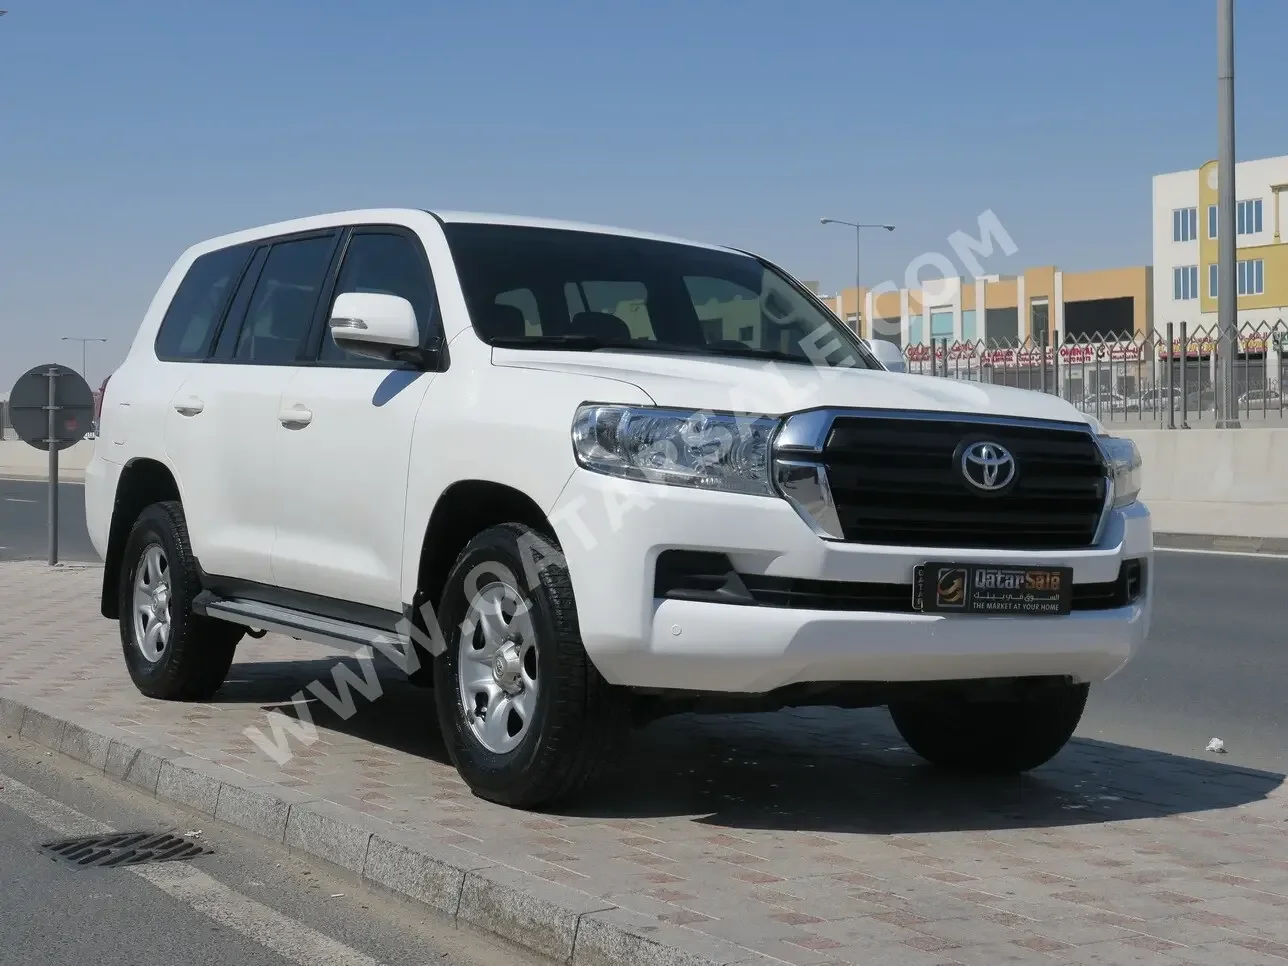  Toyota  Land Cruiser  GX  2020  Automatic  157,000 Km  6 Cylinder  Four Wheel Drive (4WD)  SUV  White  With Warranty